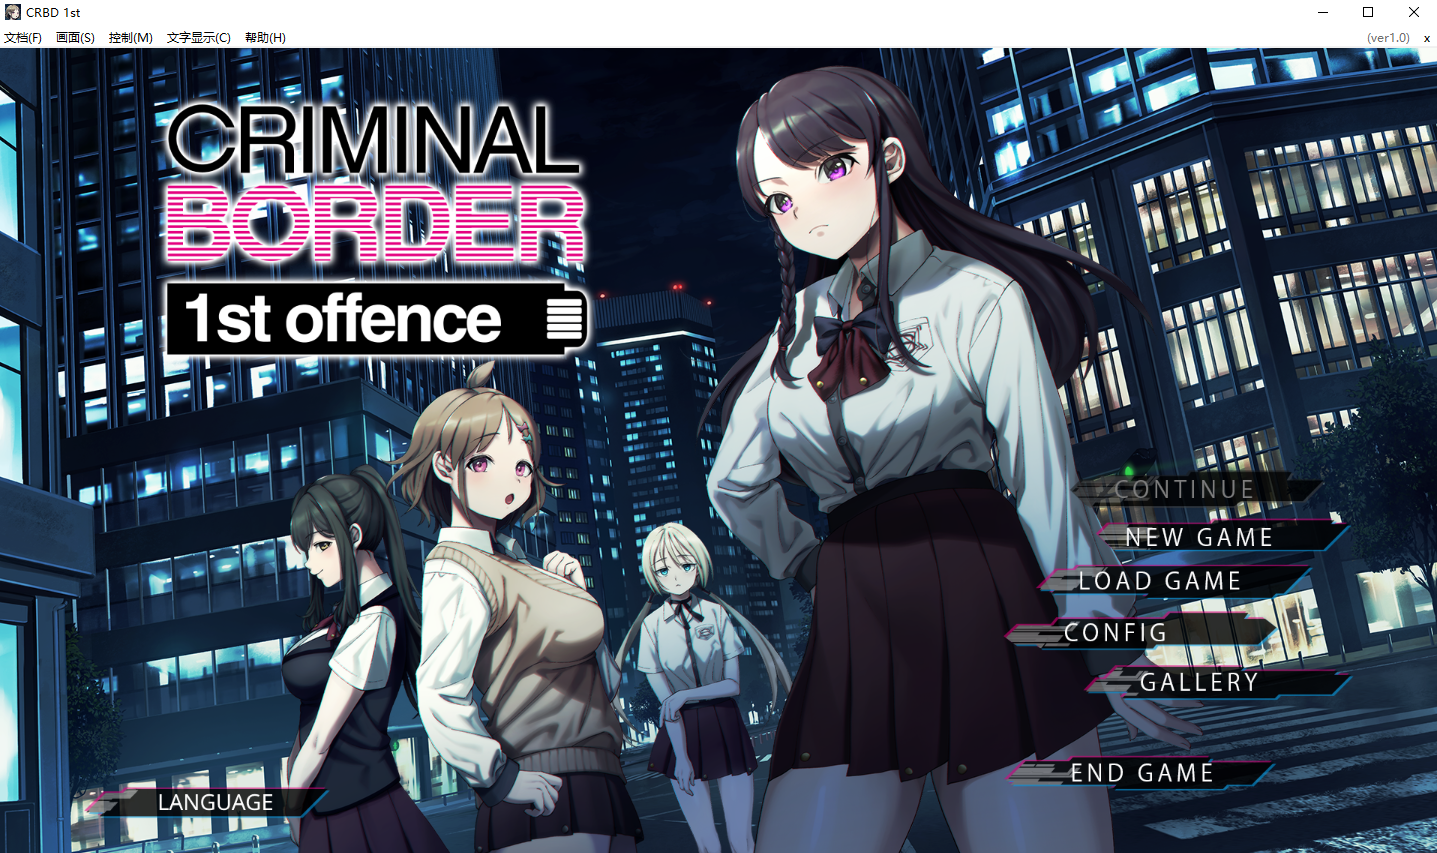 [ADV/AI汉化]  クリミナルボーダー 1st offence  [4.8G/飞猫/百度]